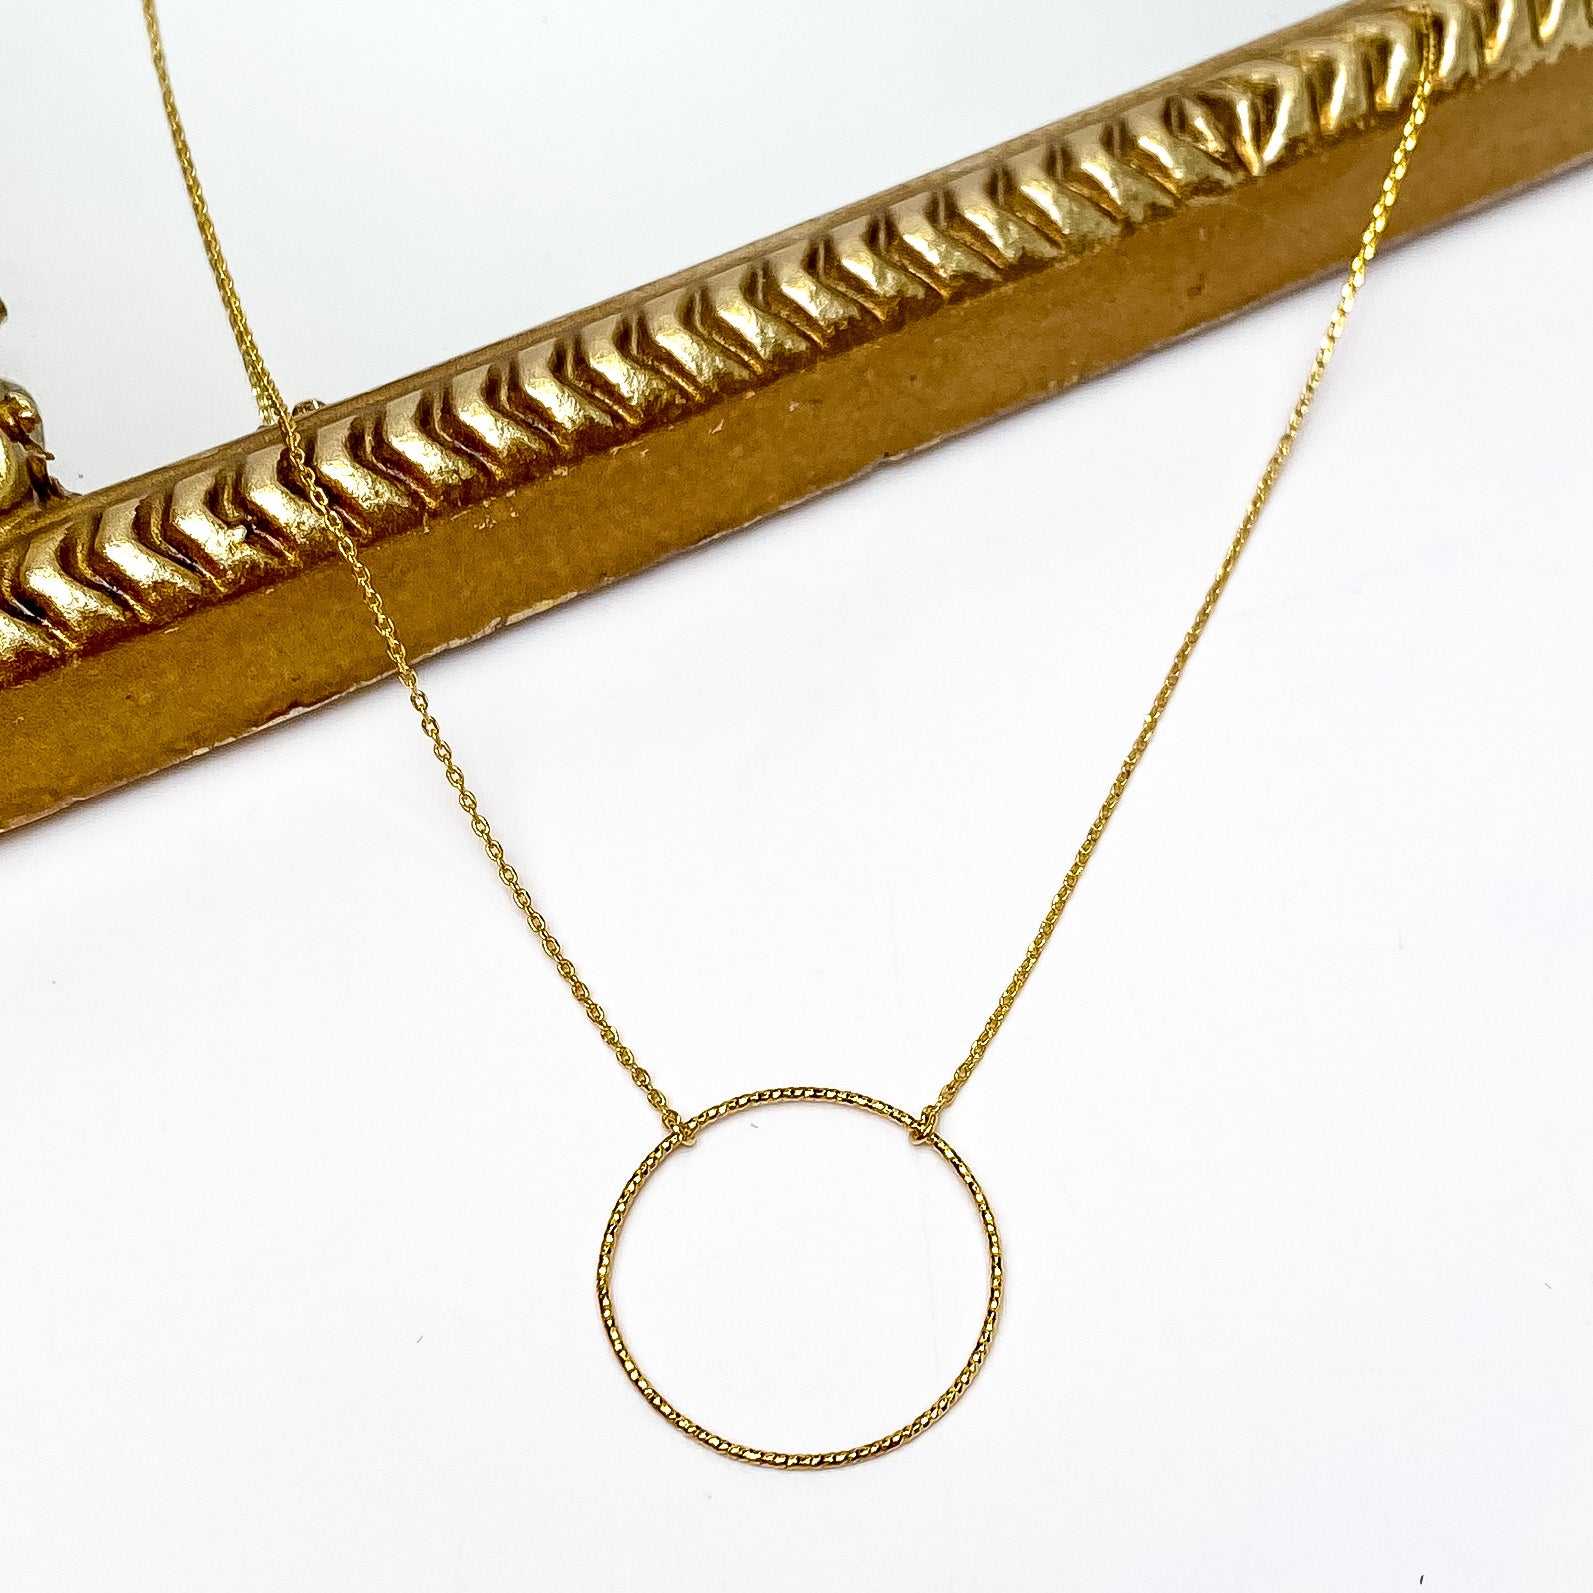 Dainty gold chain necklace with a hammered, open circle pendant. This necklace is pictured partially laying on a gold mirror on a white background. 